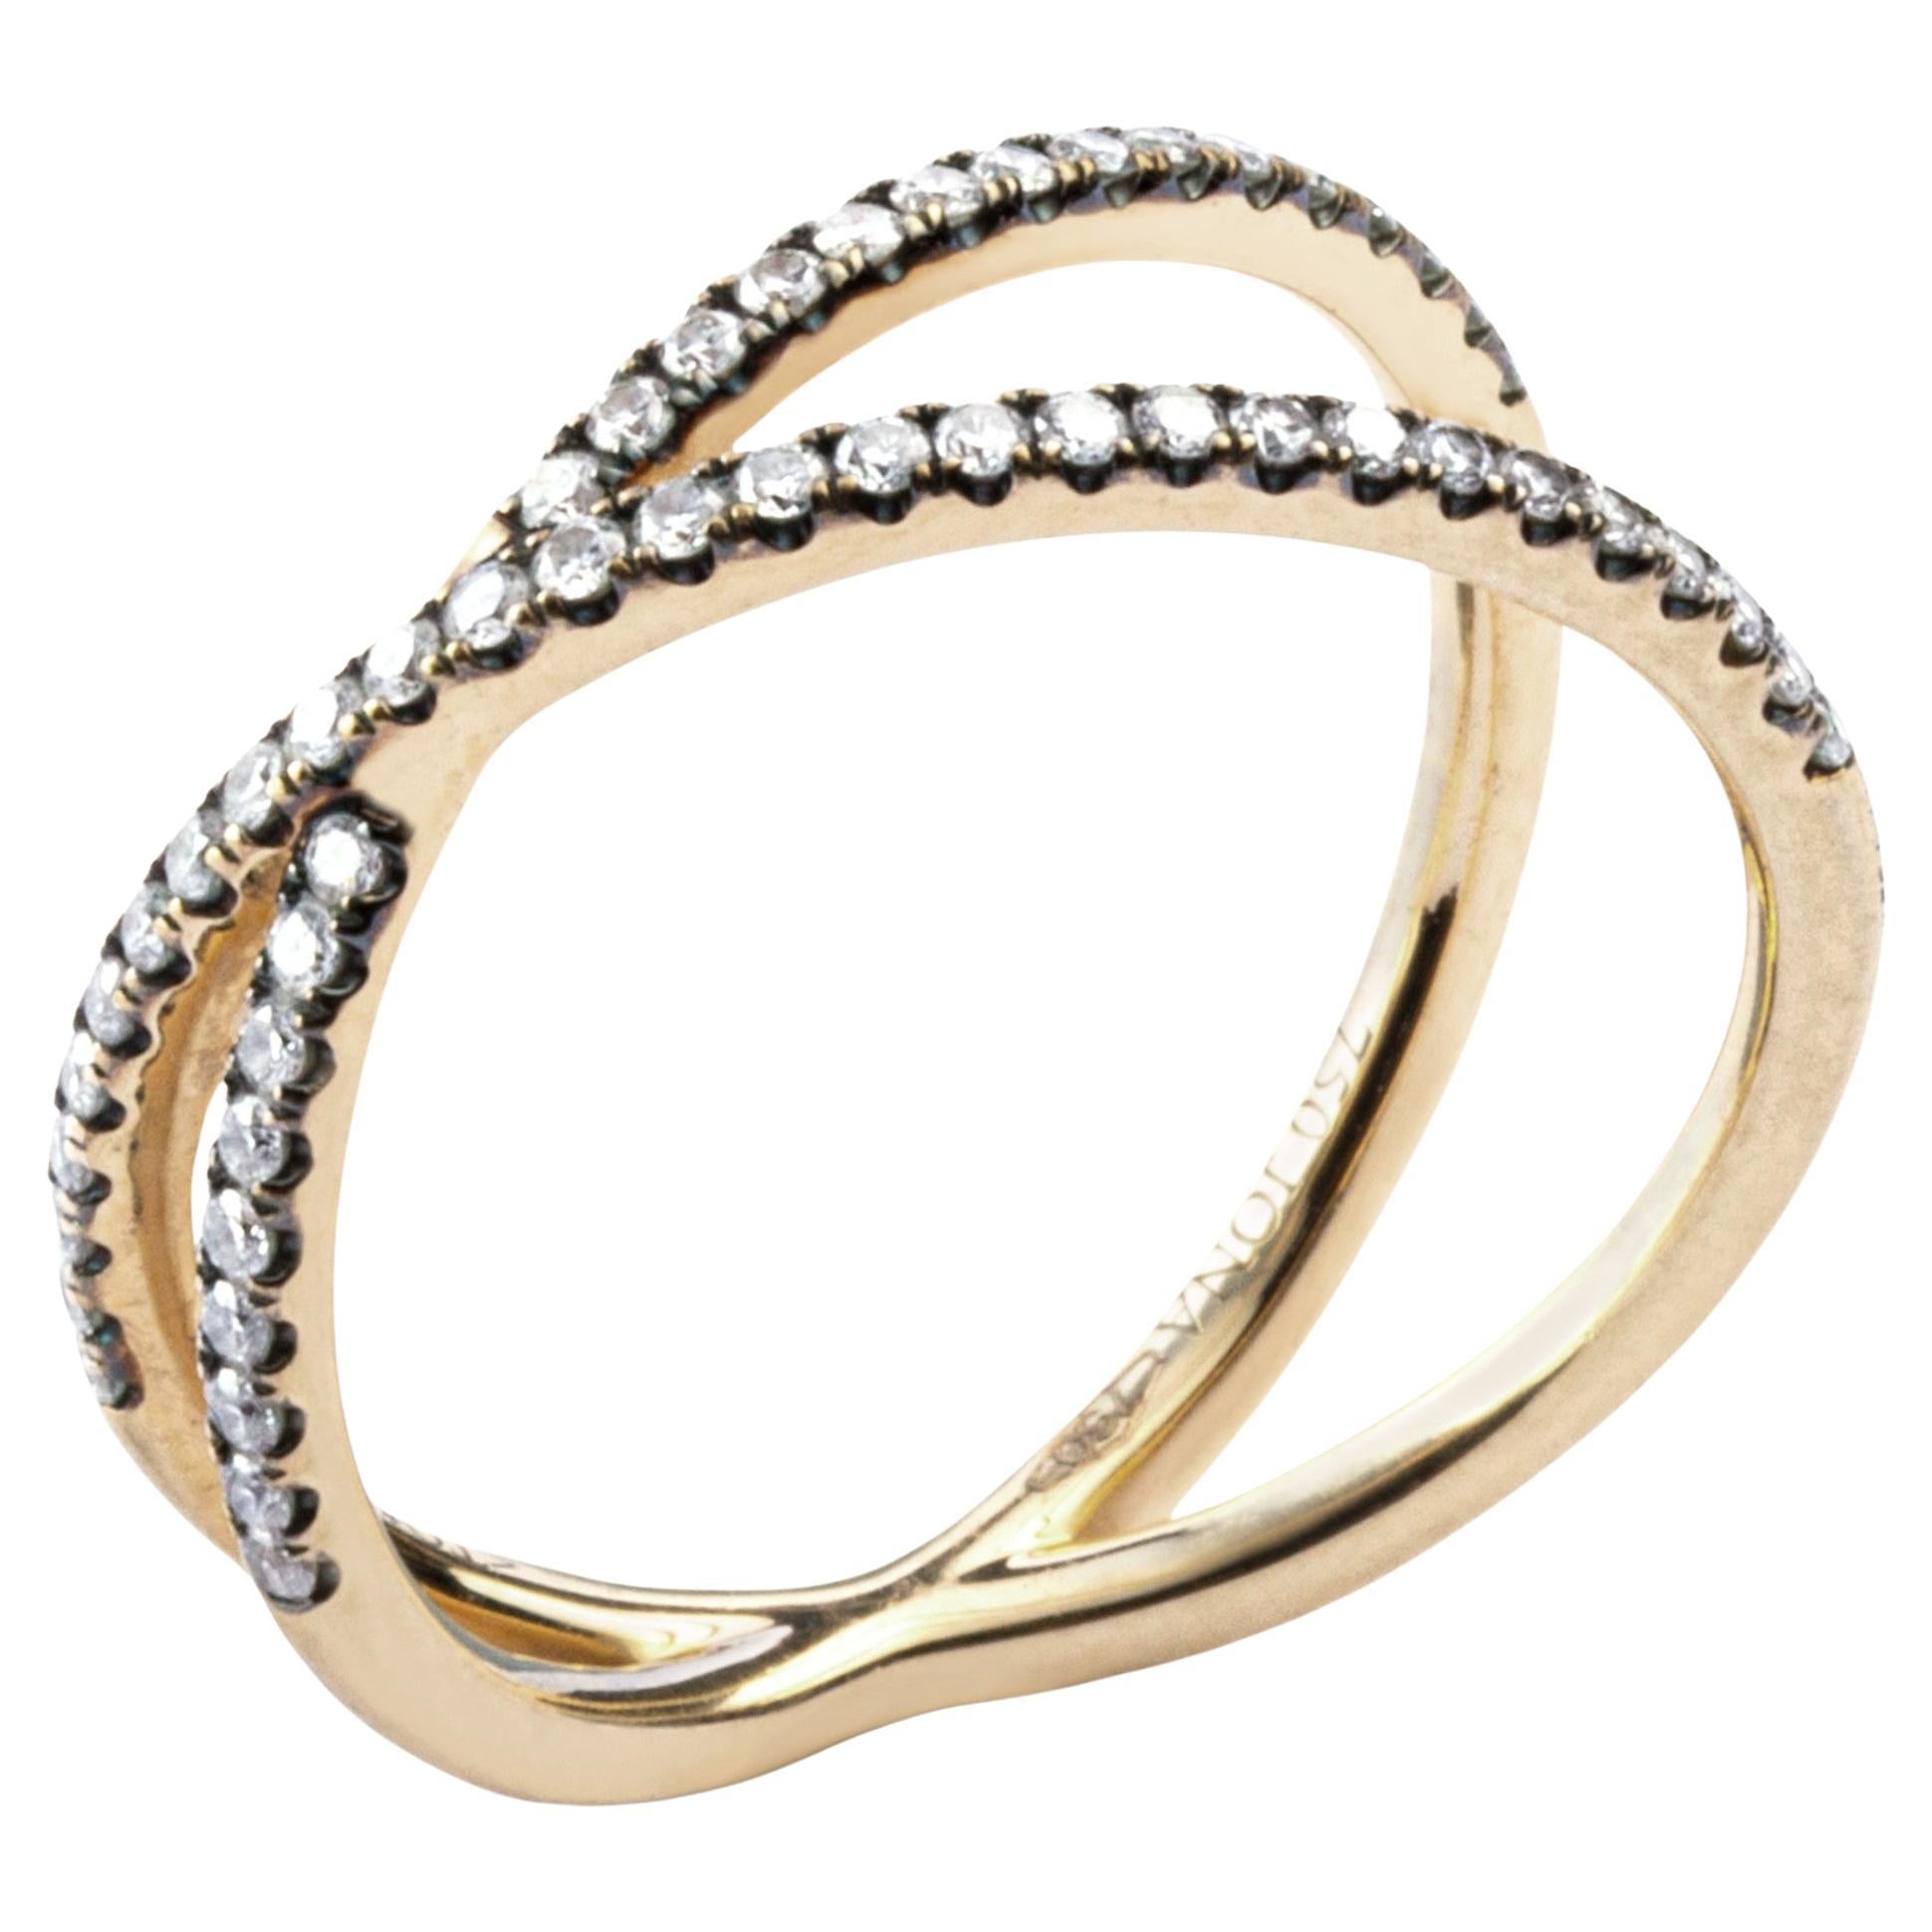 Alex Jona design collection, hand crafted in Italy, 18 karat yellow gold Twiggy diamond ring, featuring 0.24 carats of white diamonds with black rhodium setting.

Alex Jona jewels stand out, not only for their special design and for the excellent